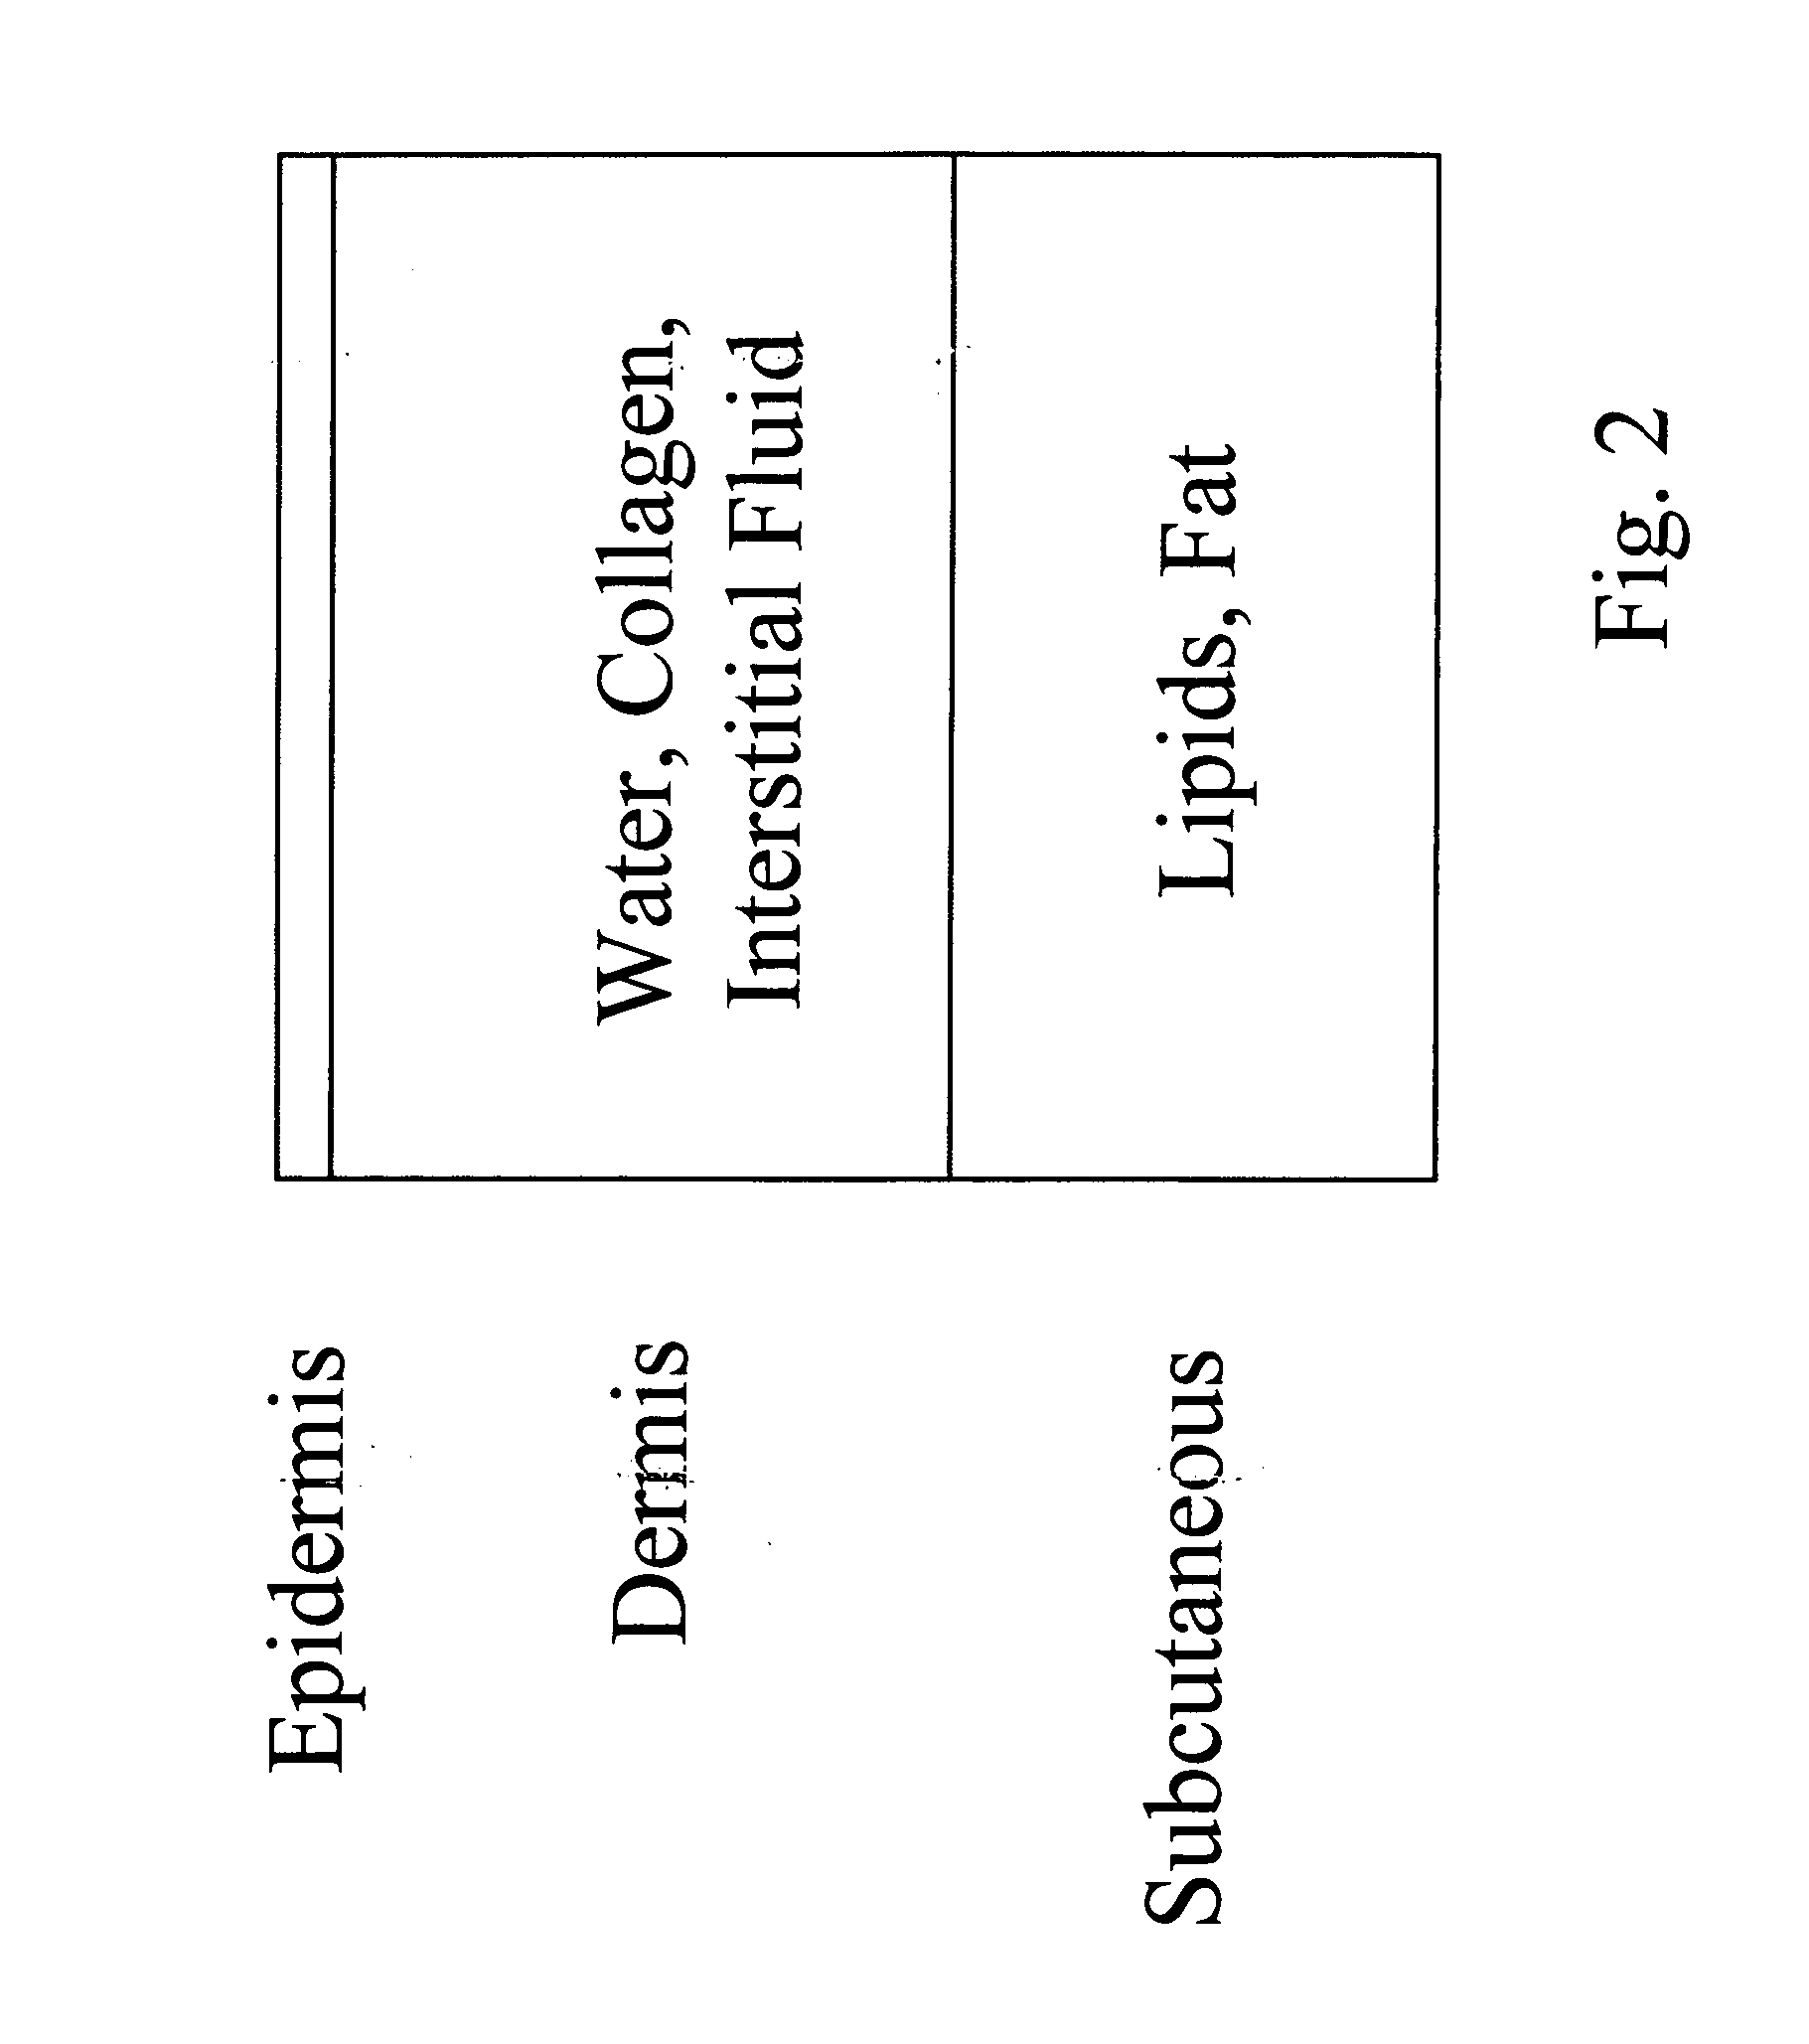 Apparatus and method for noninvasively monitoring for the presence of alcohol or substances of abuse in controlled environments